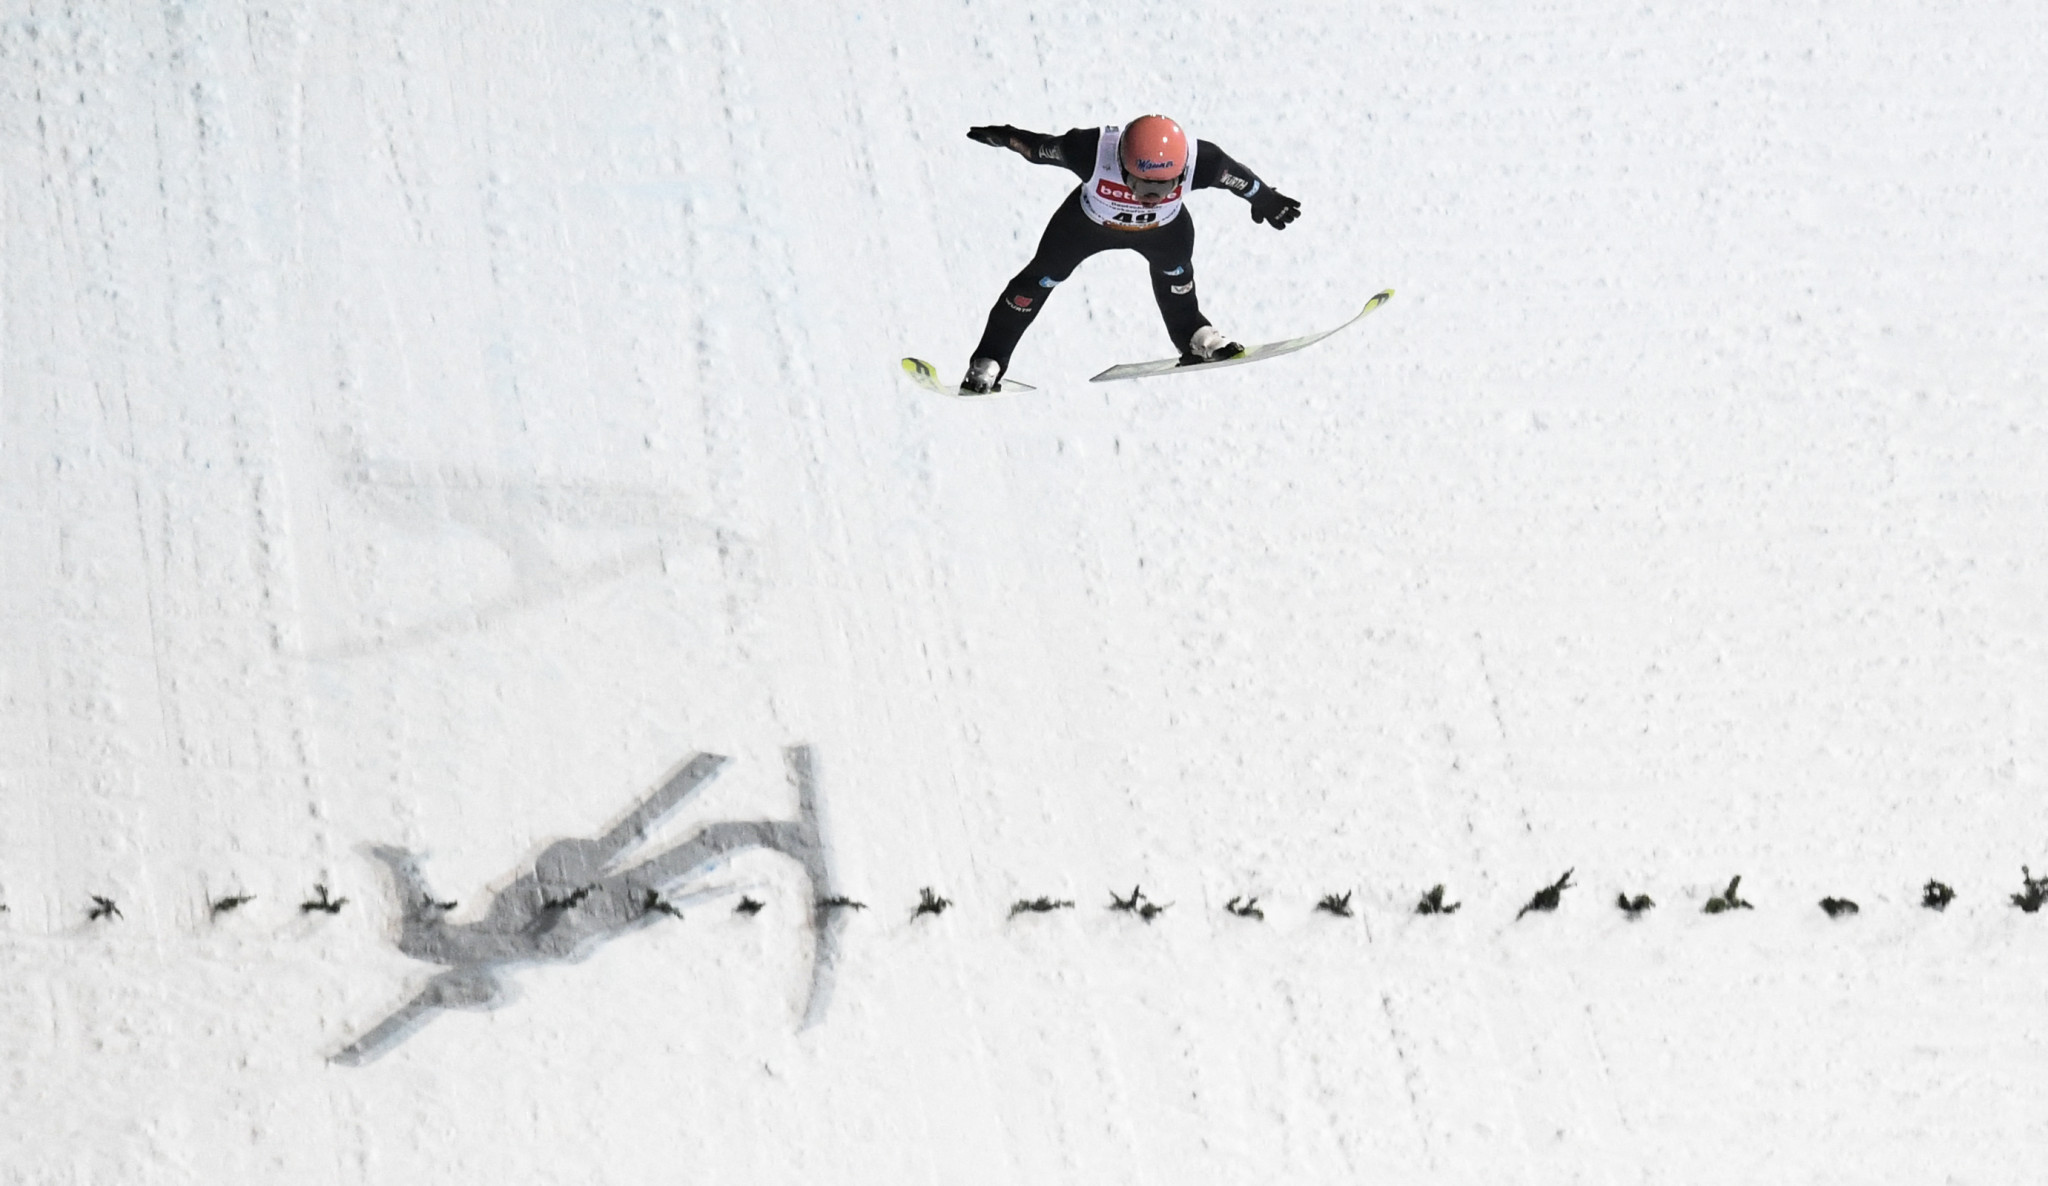 Karl Geiger went top of the FIS Ski Jumping World Cup today ©Getty Images